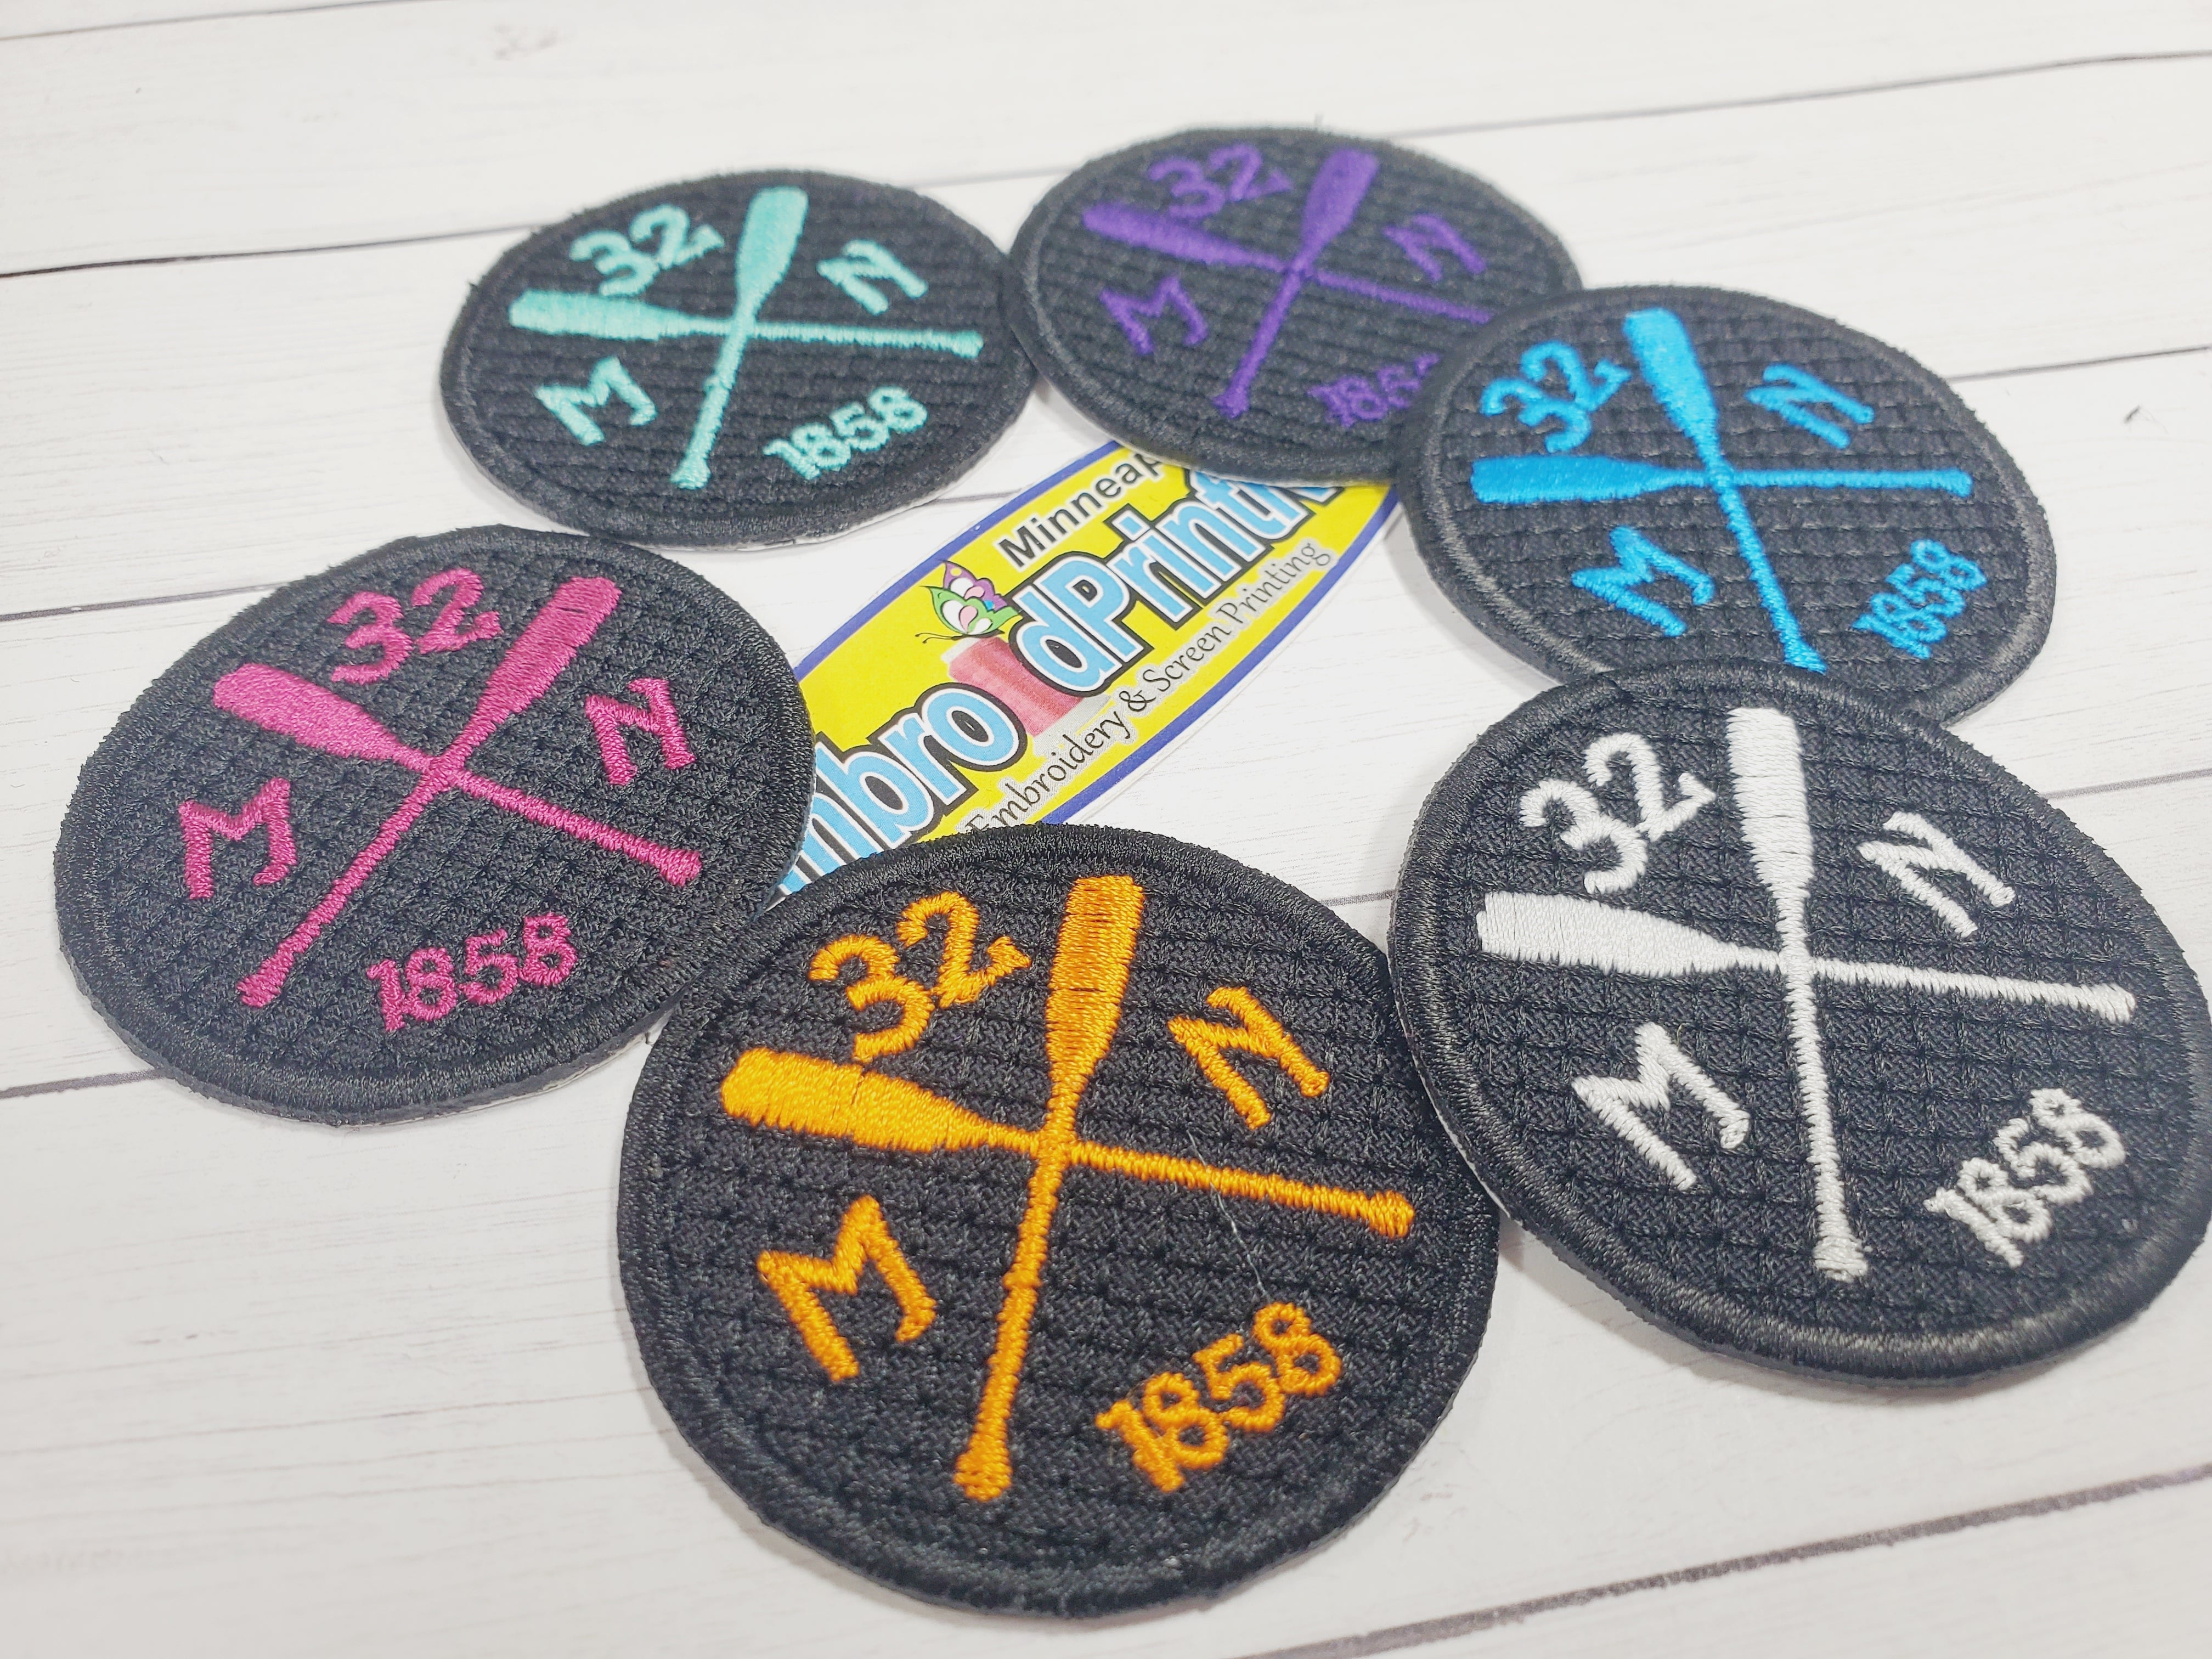 Embroidered MN Patch — WATCHISTRY